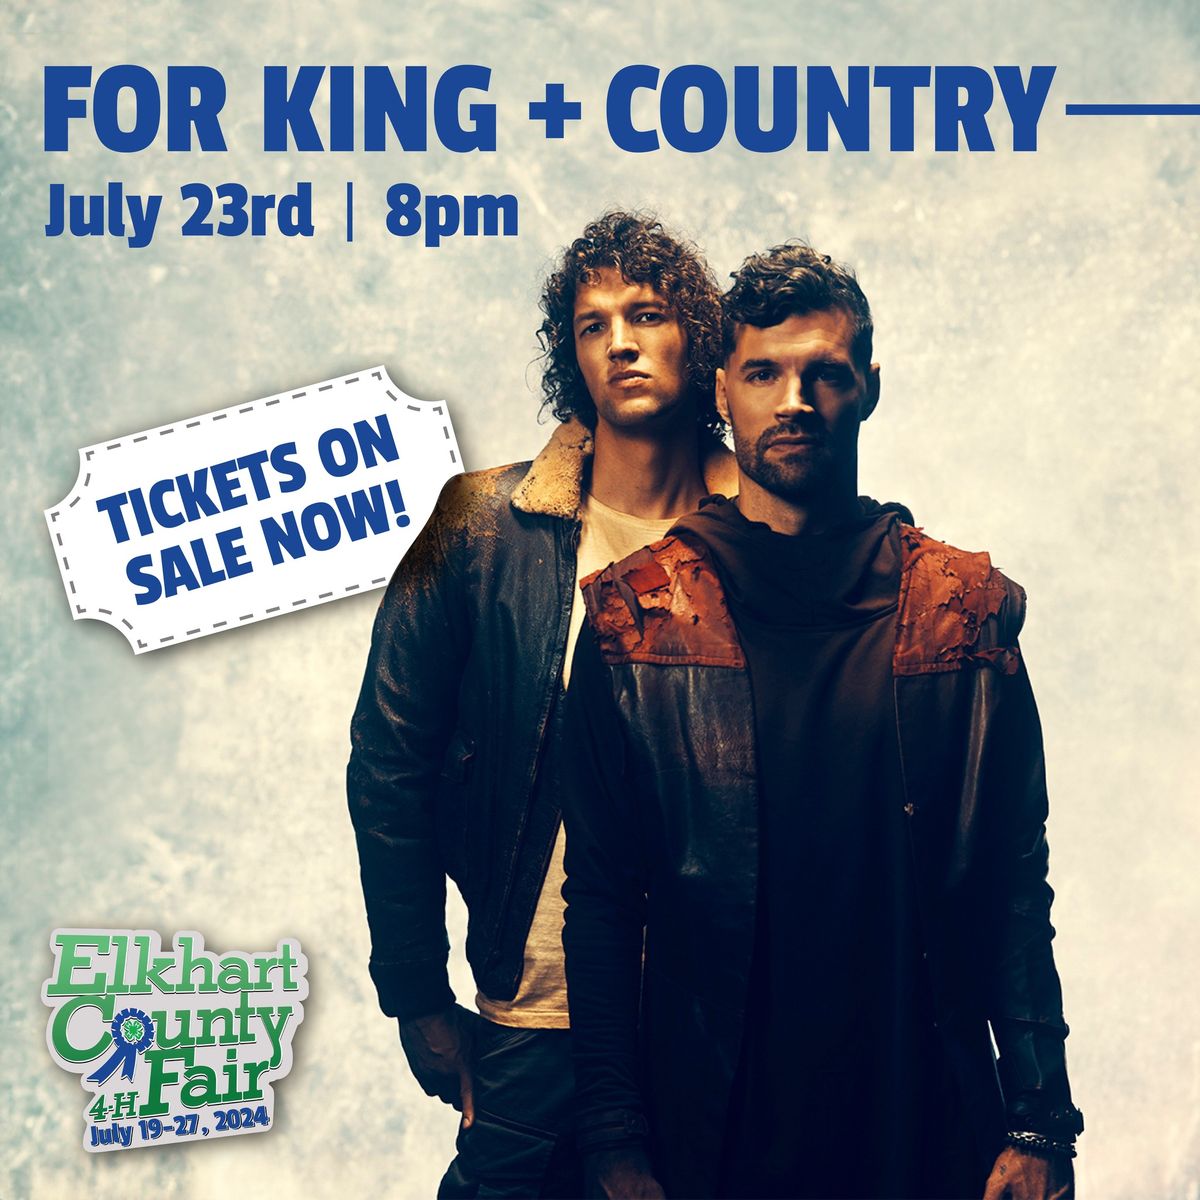 For King + Country at the Elkhart County 4-H Fair